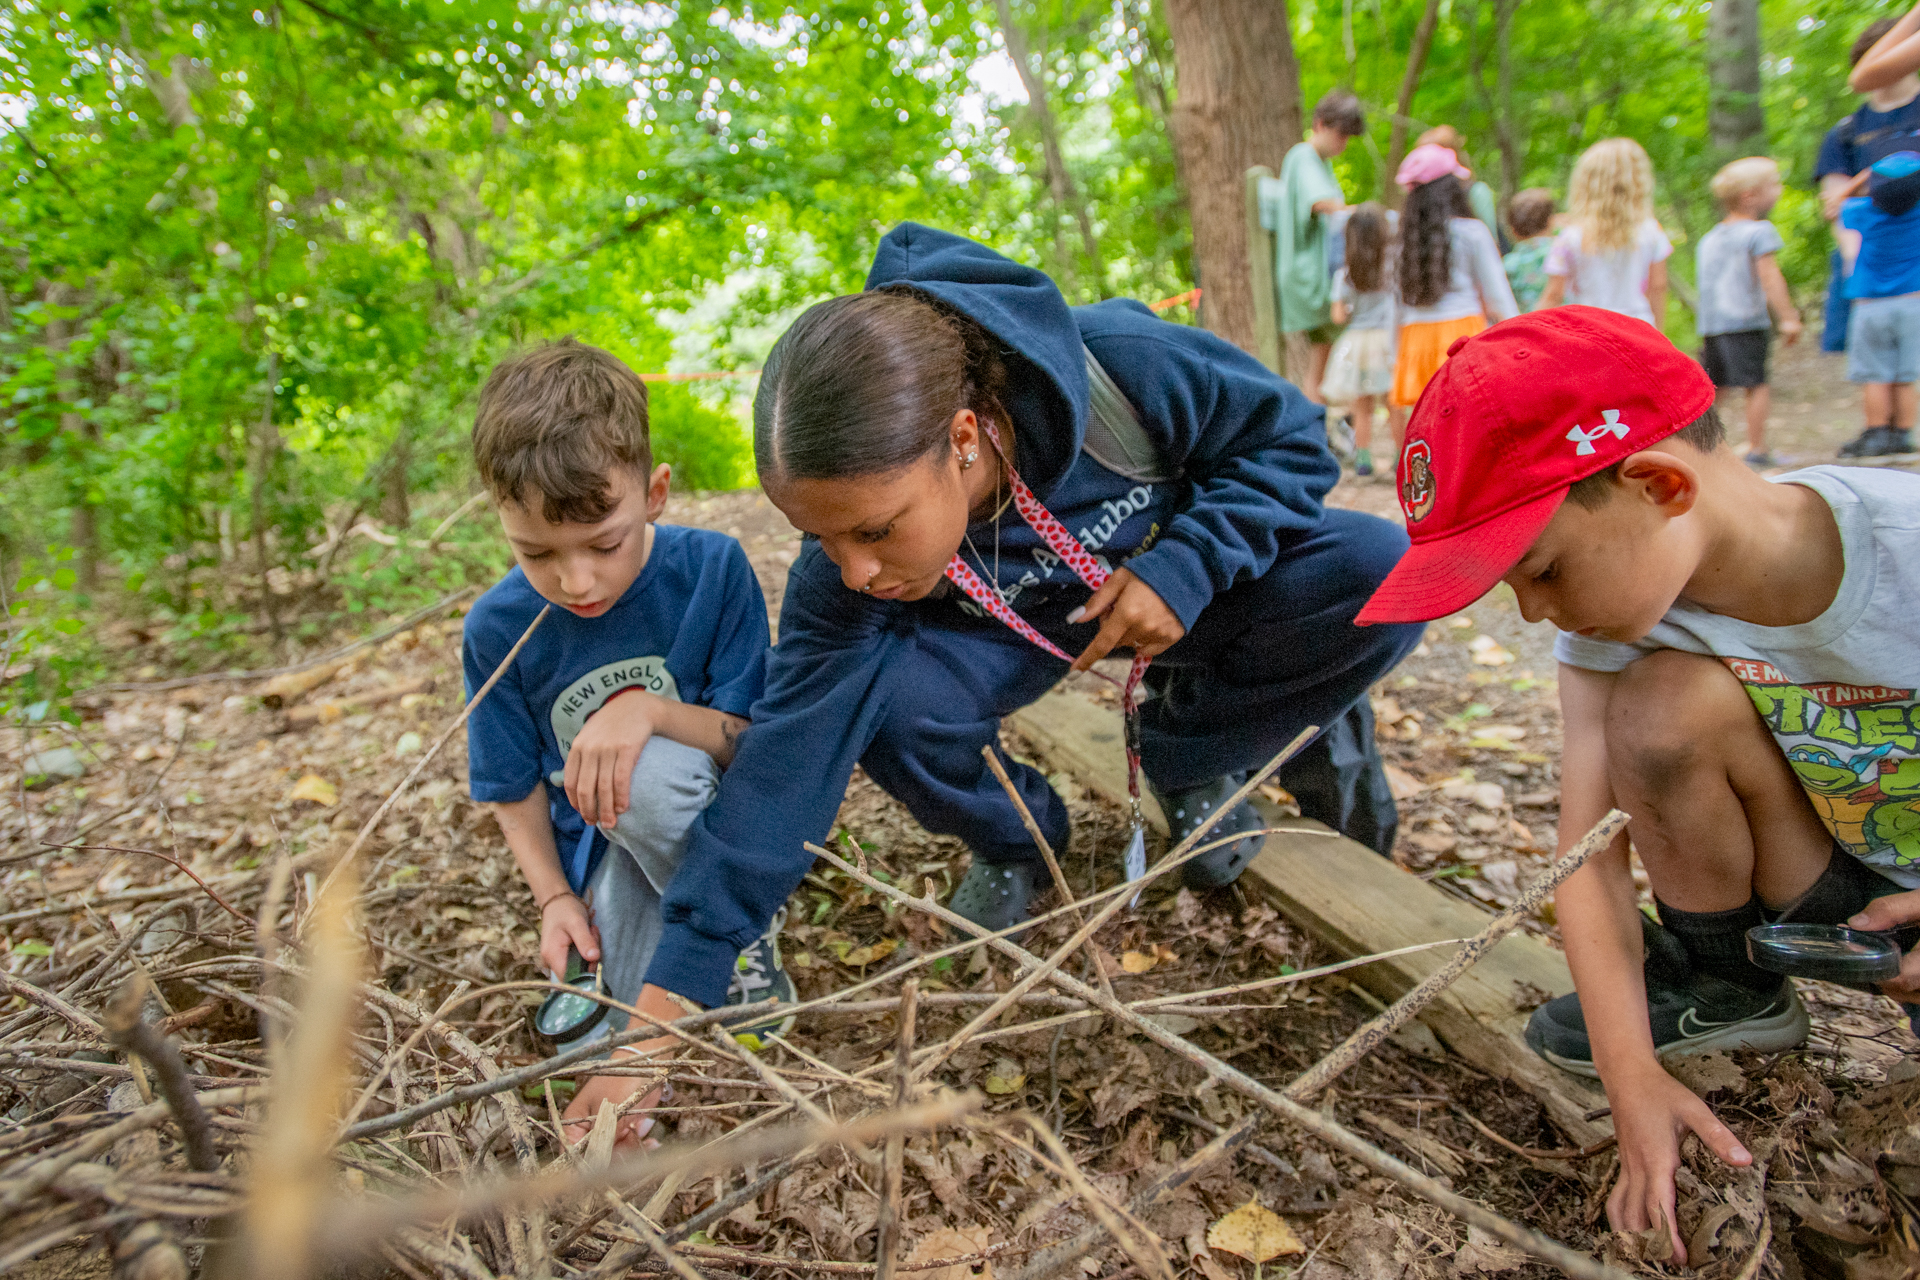 Campers at Boston Nature Center roll logs and look through leaf litter for insects and other invertebrates with their counselor